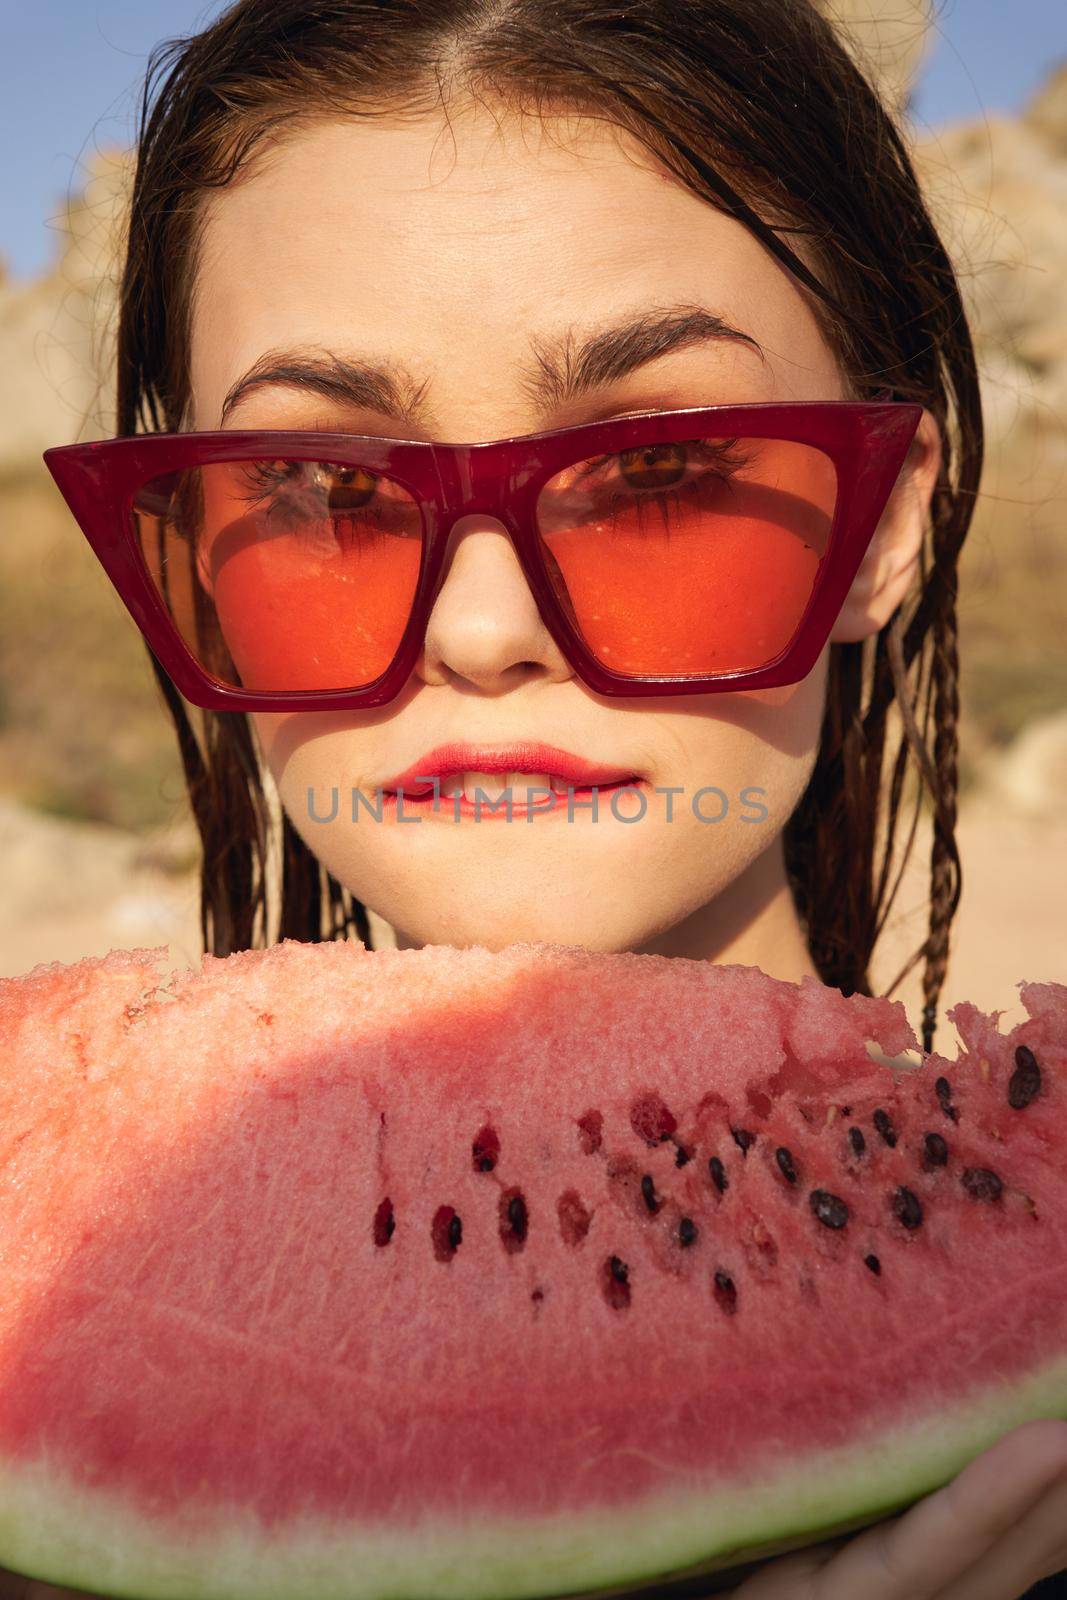 woman eating watermelon outdoors Sun summer close-up. High quality photo